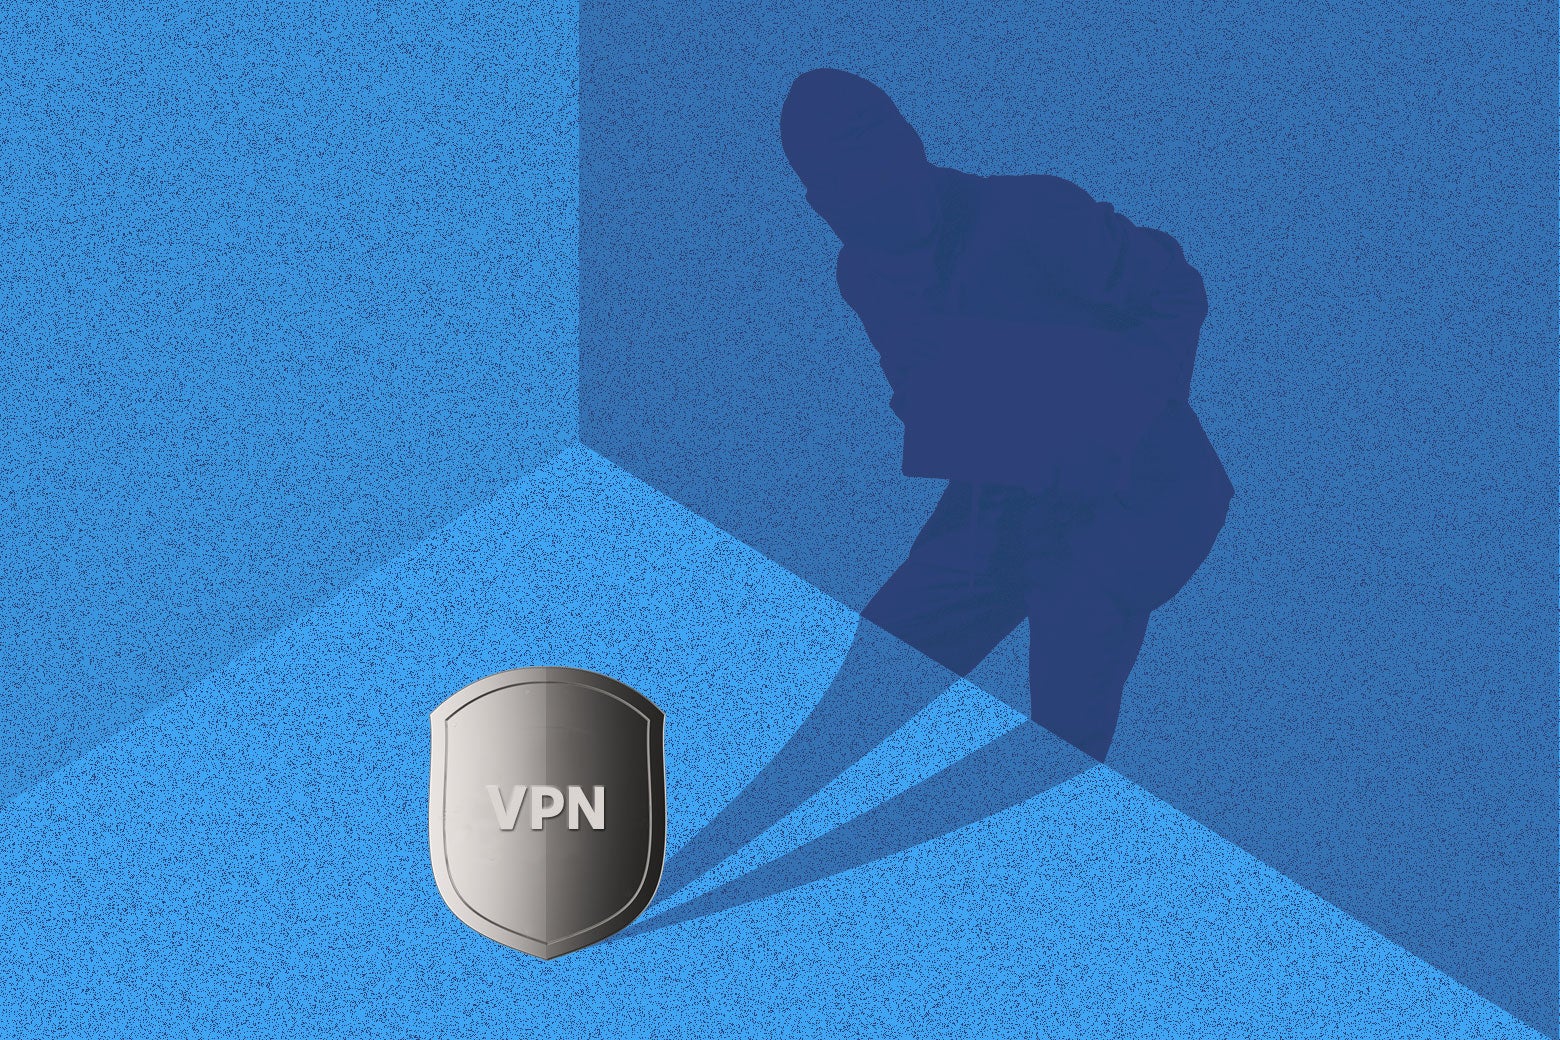 Which VPN should you trust? Thats tougher to answer than youd think.